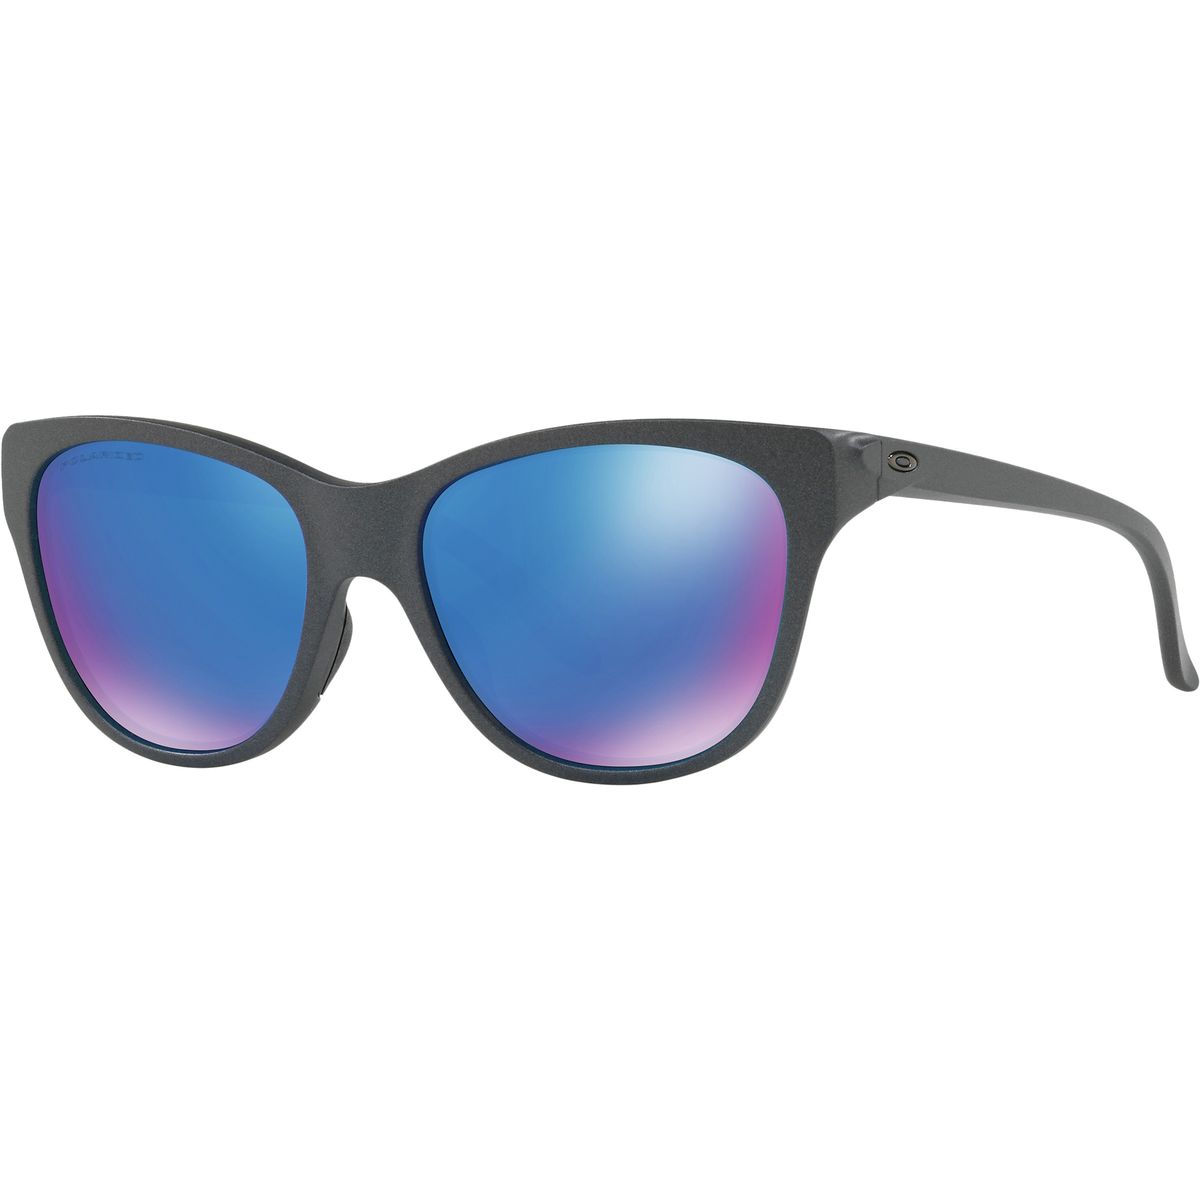 Oakley Hold Out Polarized Sunglasses - Women's